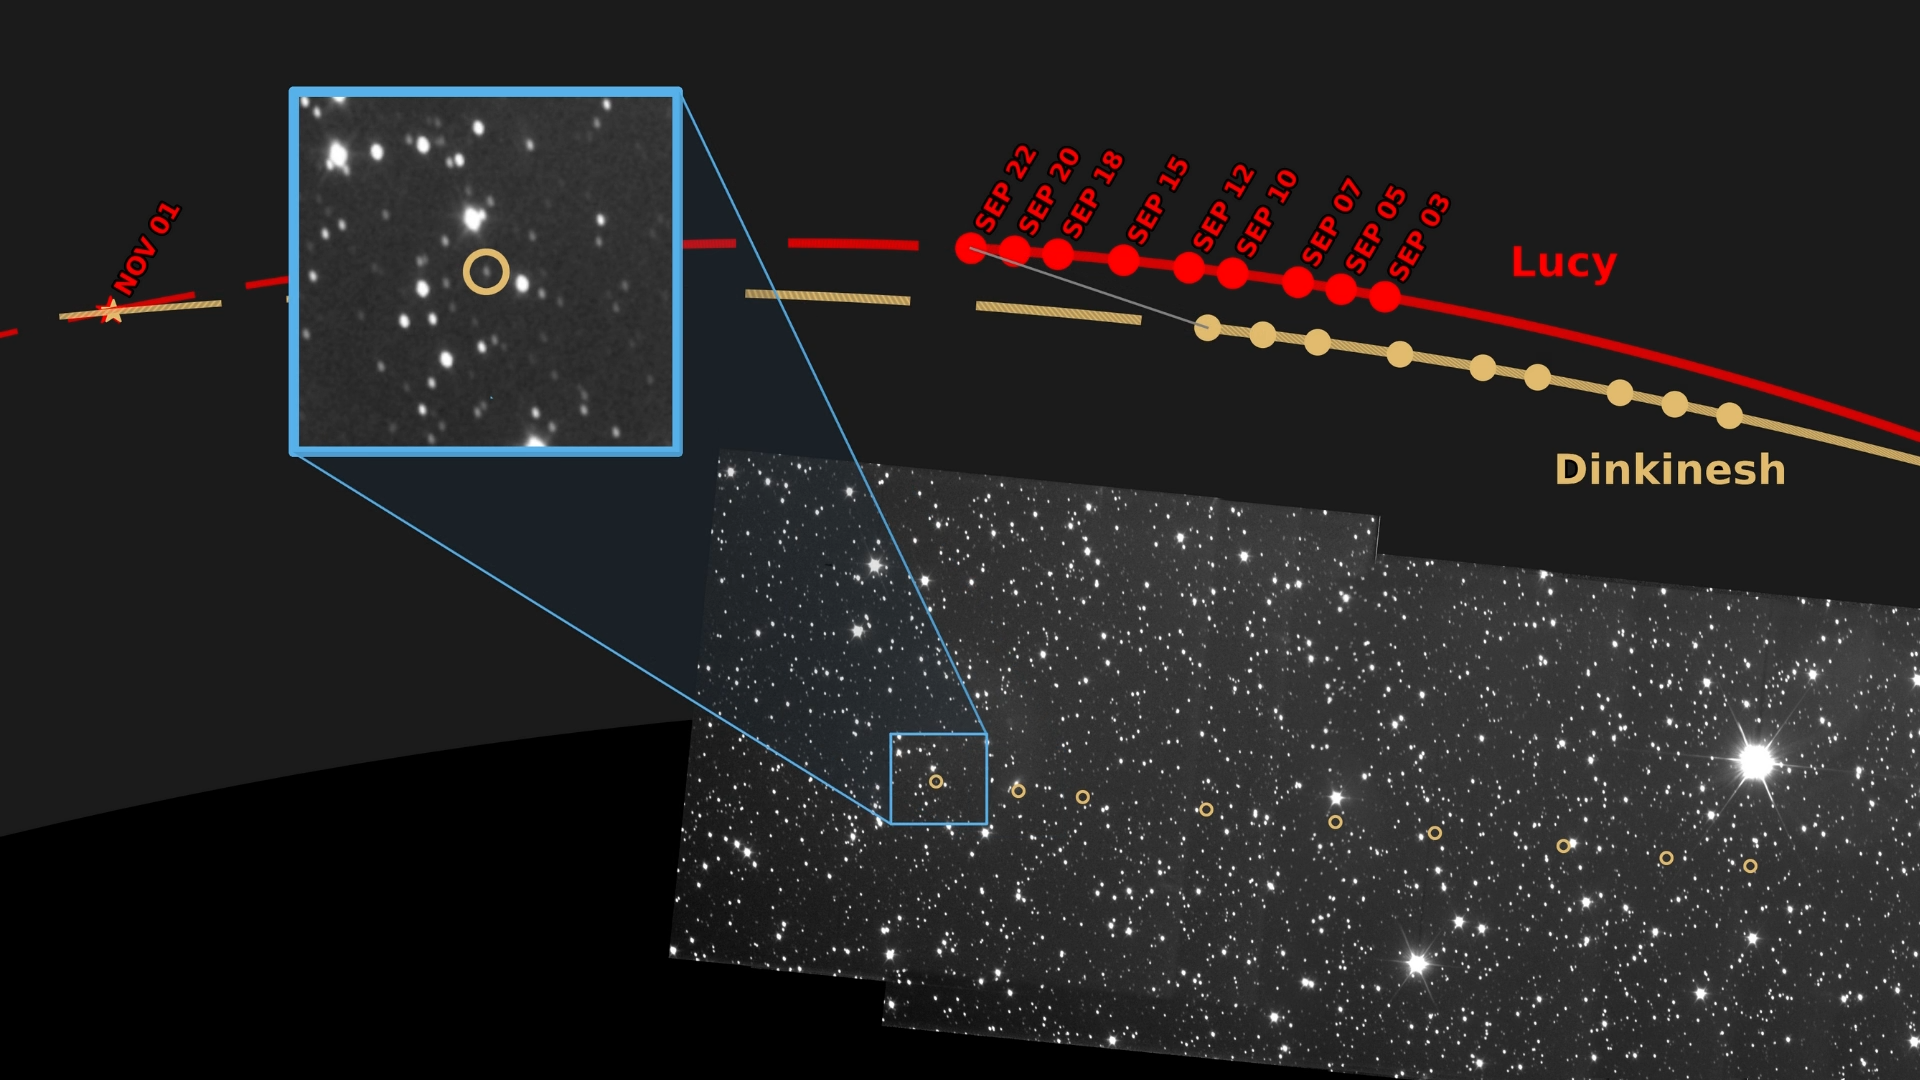 Visualization showing a black and white image of stars, with a zoomed in view square of asteroid Dinkenish with a yellow circle around it. There's a timeline above the image showing the dates Lucy passed near the asteorid between Sept. 3 through Sept. 22, and will eventually Lucy passes by the asteroid on Nov. 1.